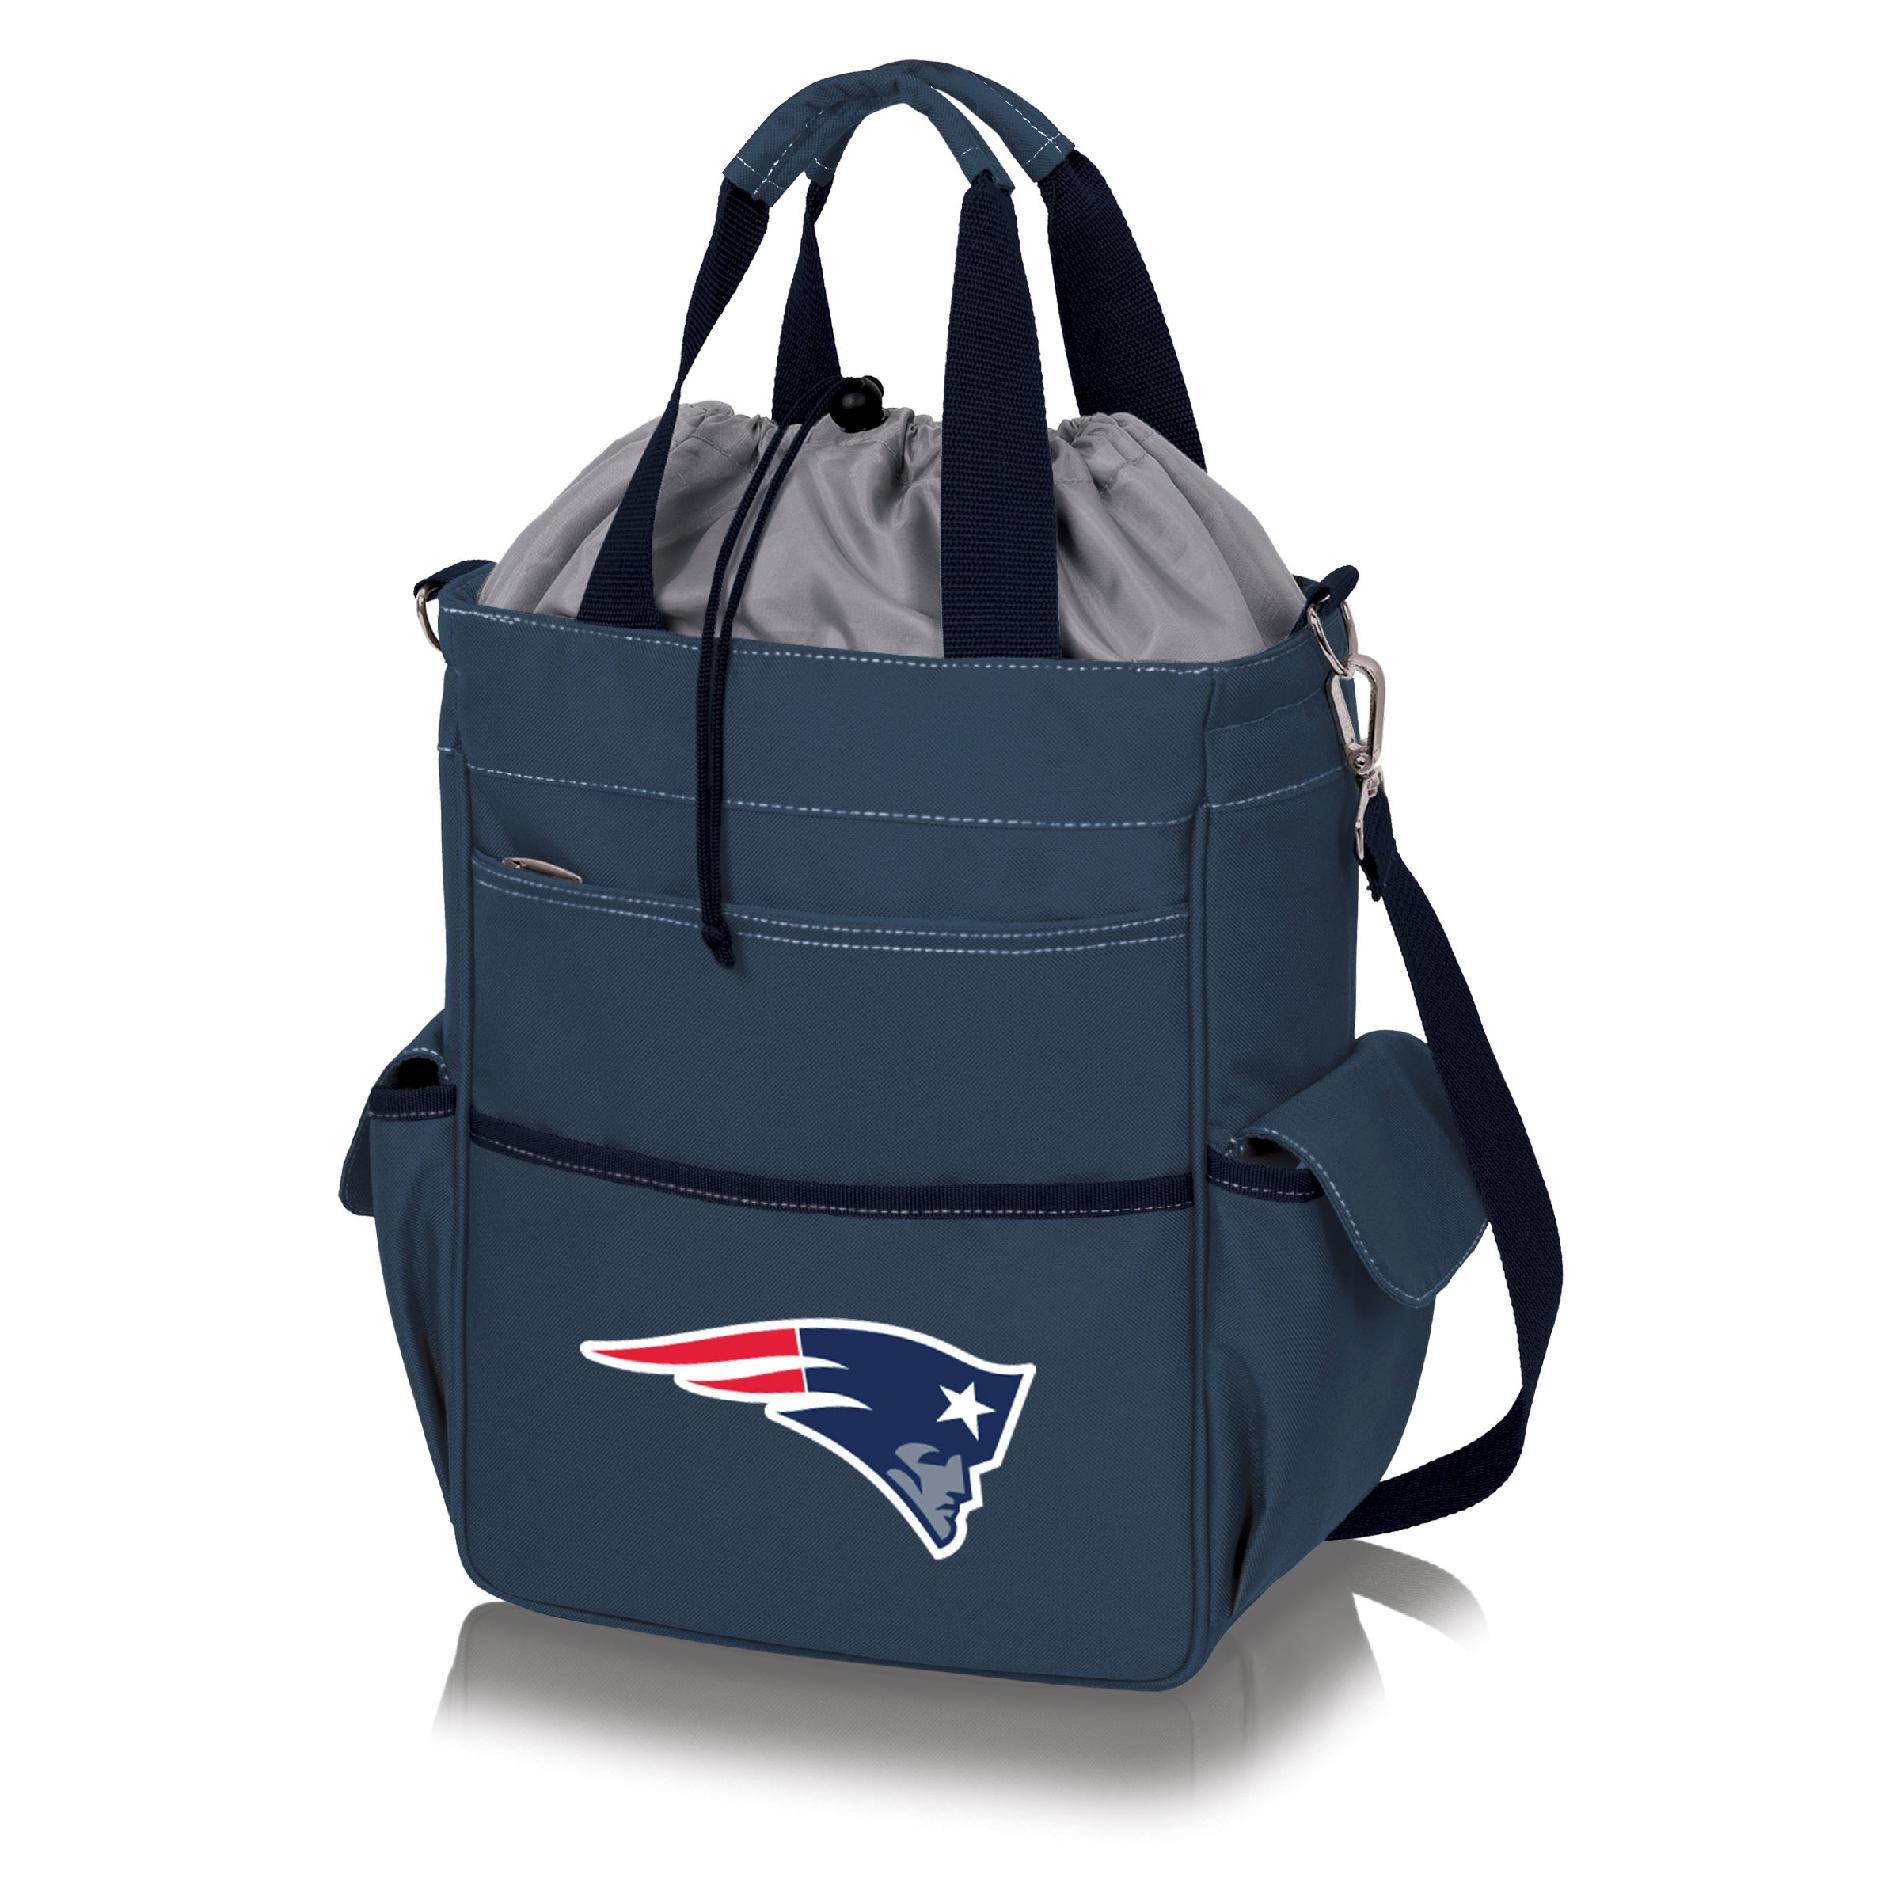 Picnic Time NFL Activo Cooler Tote